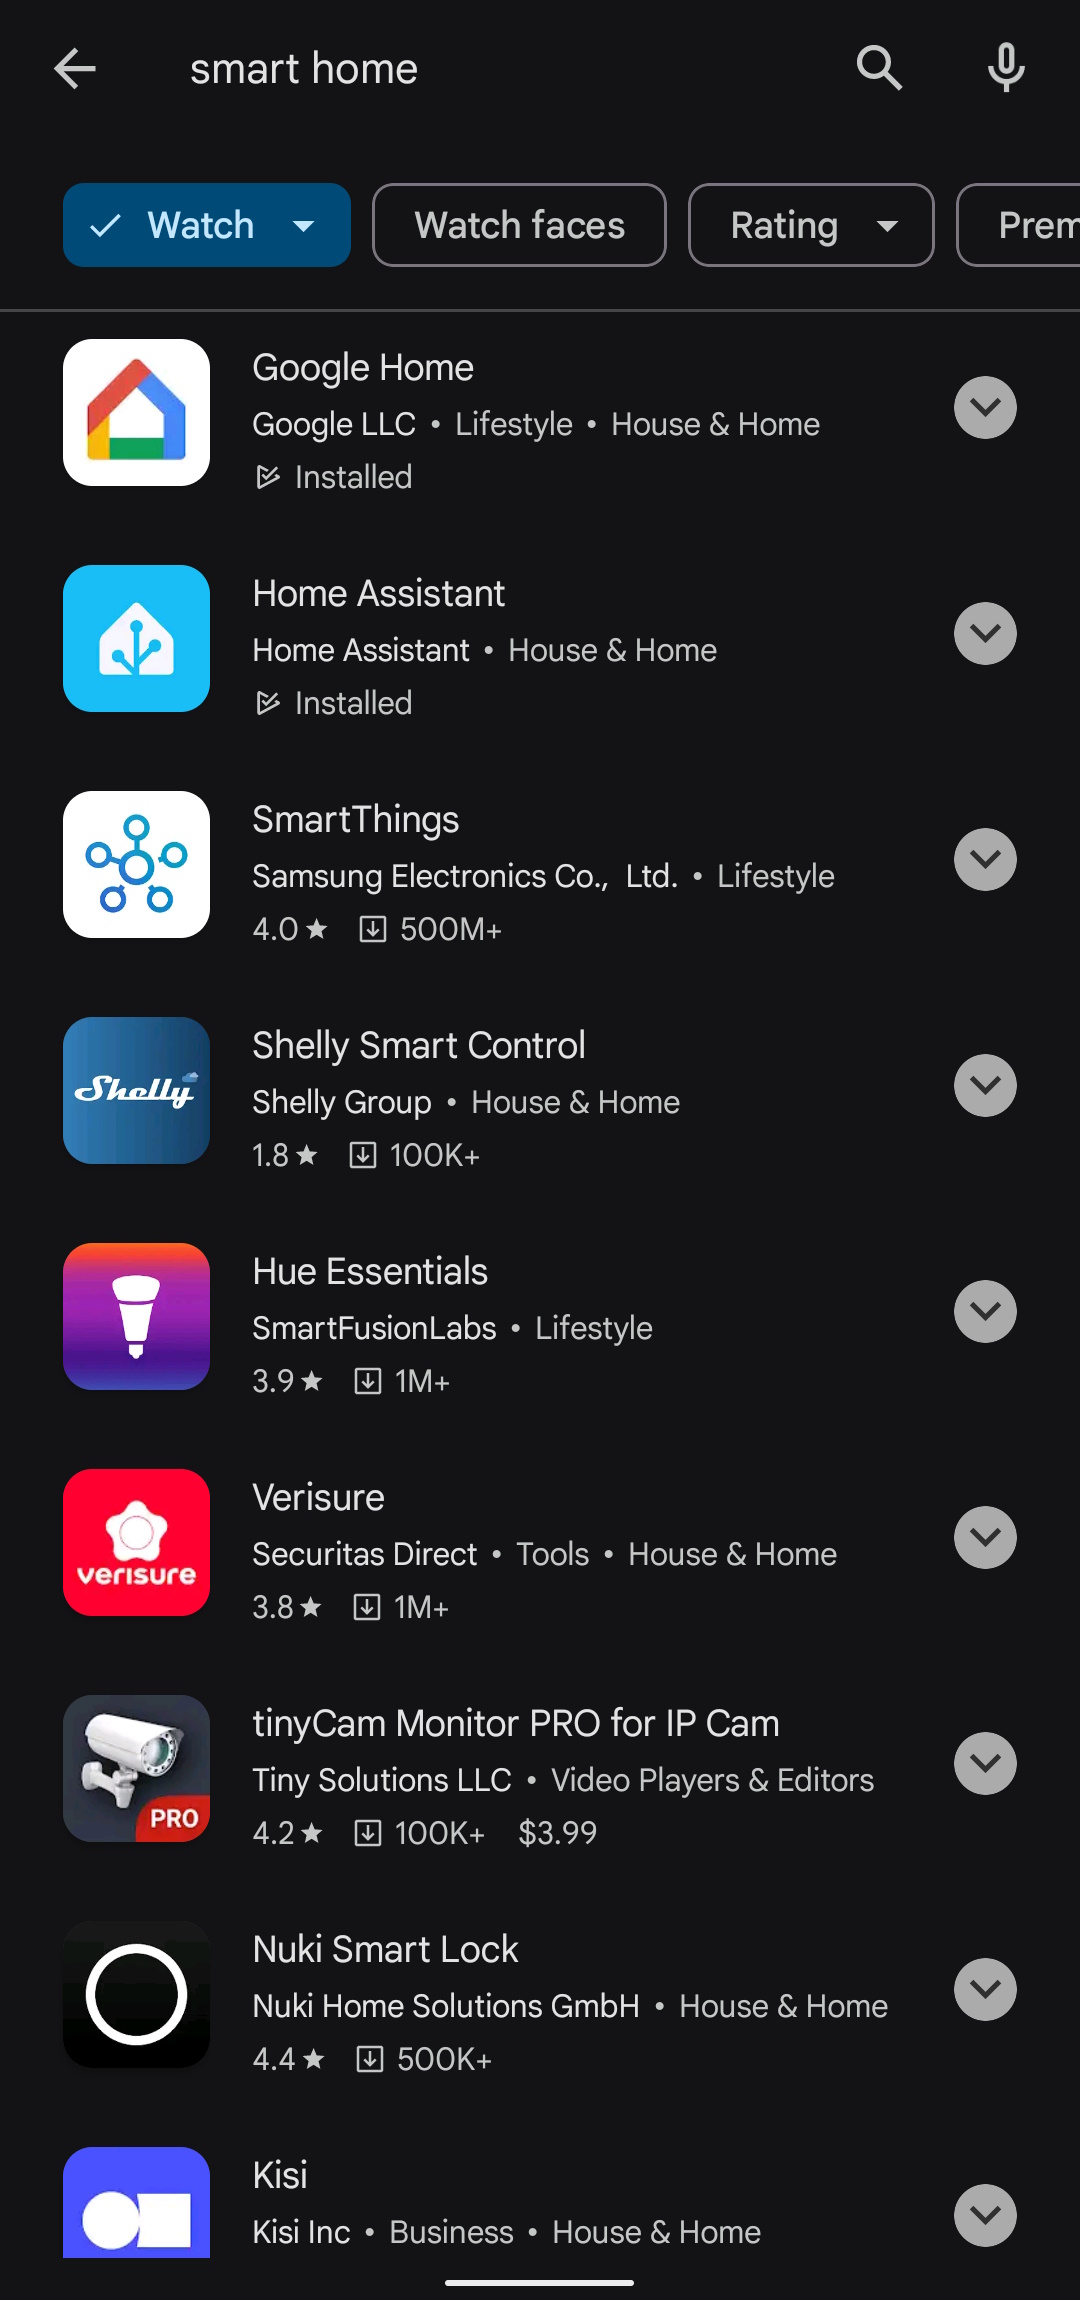 Other smart home apps